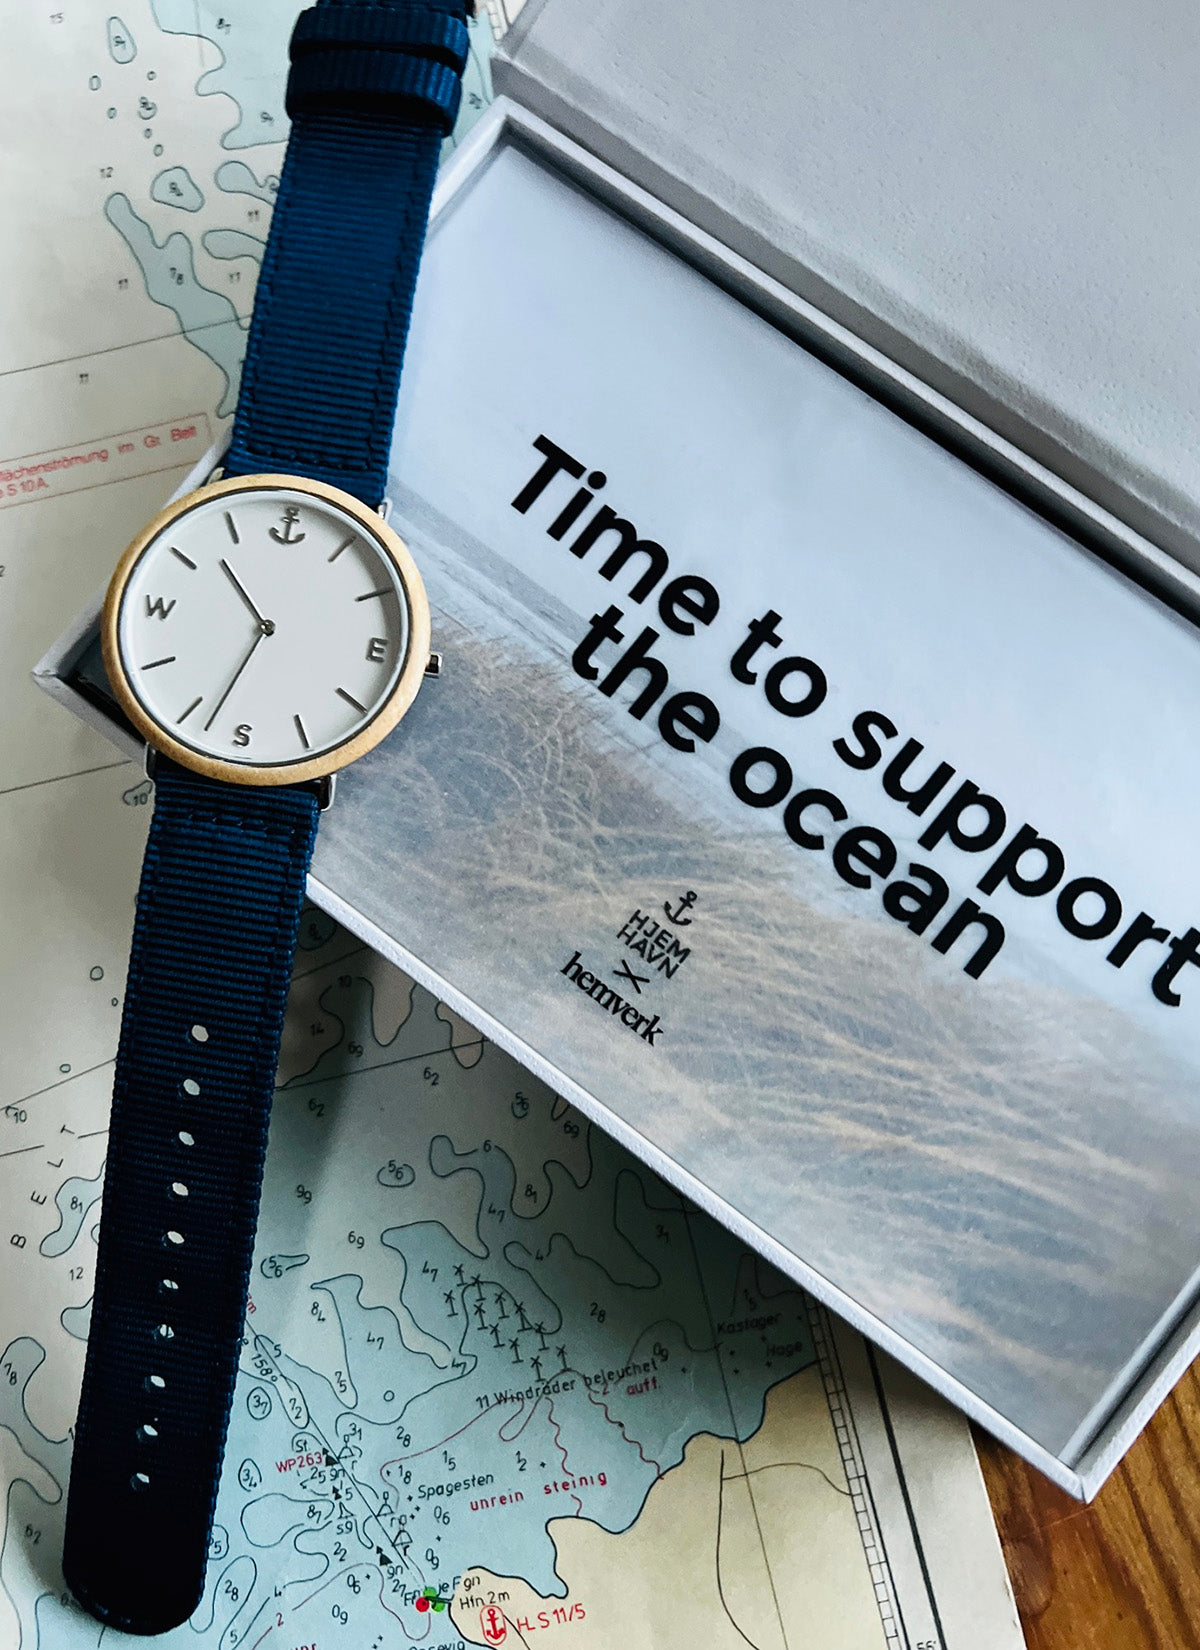 Watch - "Time to Support the Ocean"